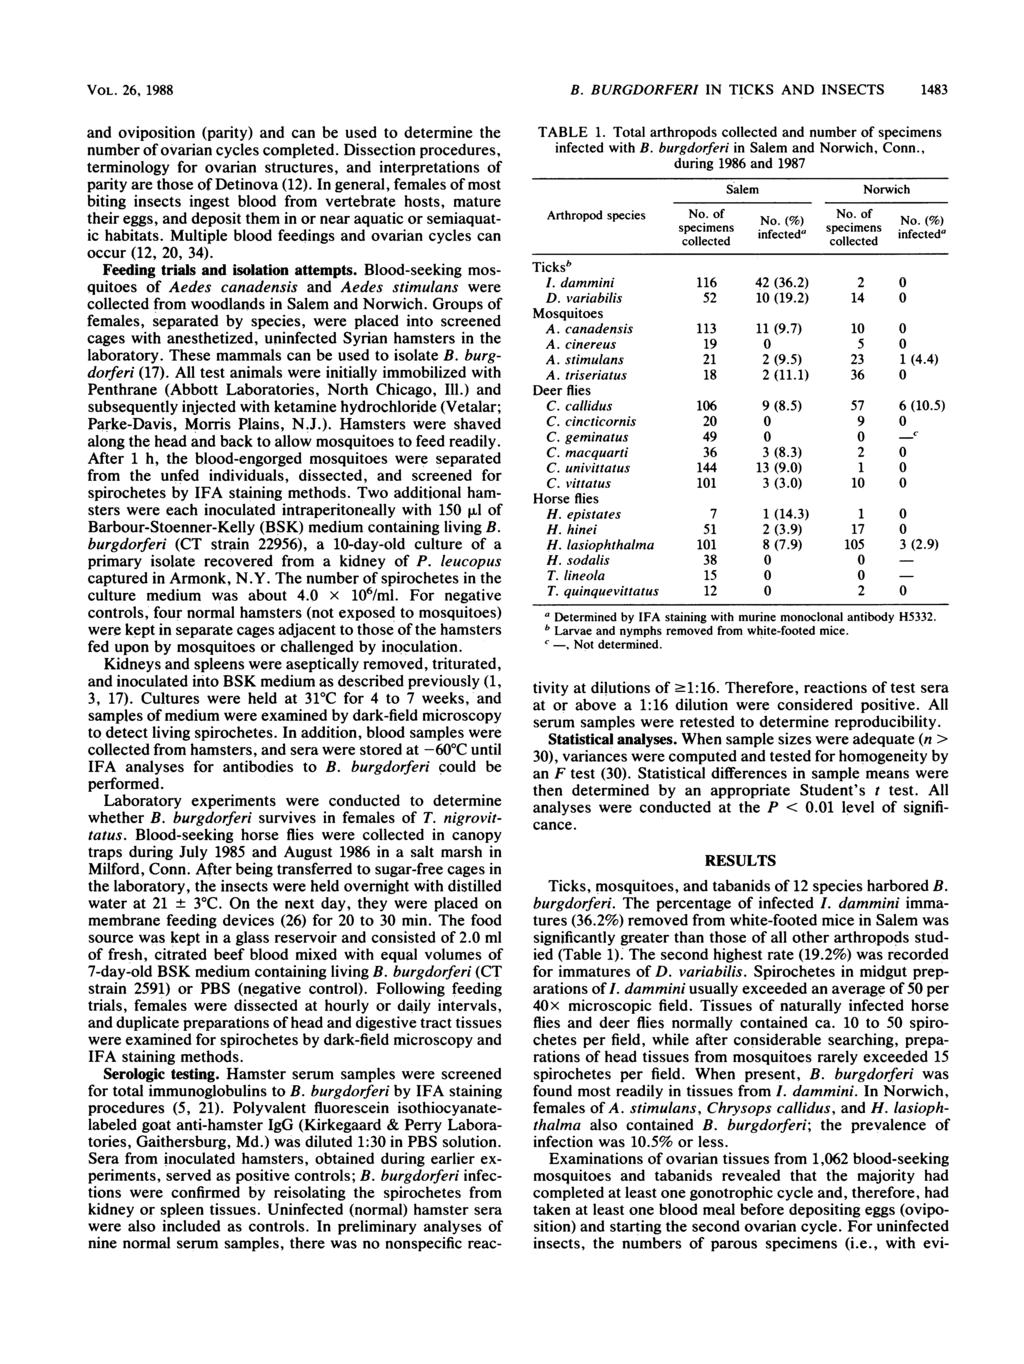 VOL. 26, 1988 and oviposition (parity) and can be used to determine the number of ovarian cycles completed.